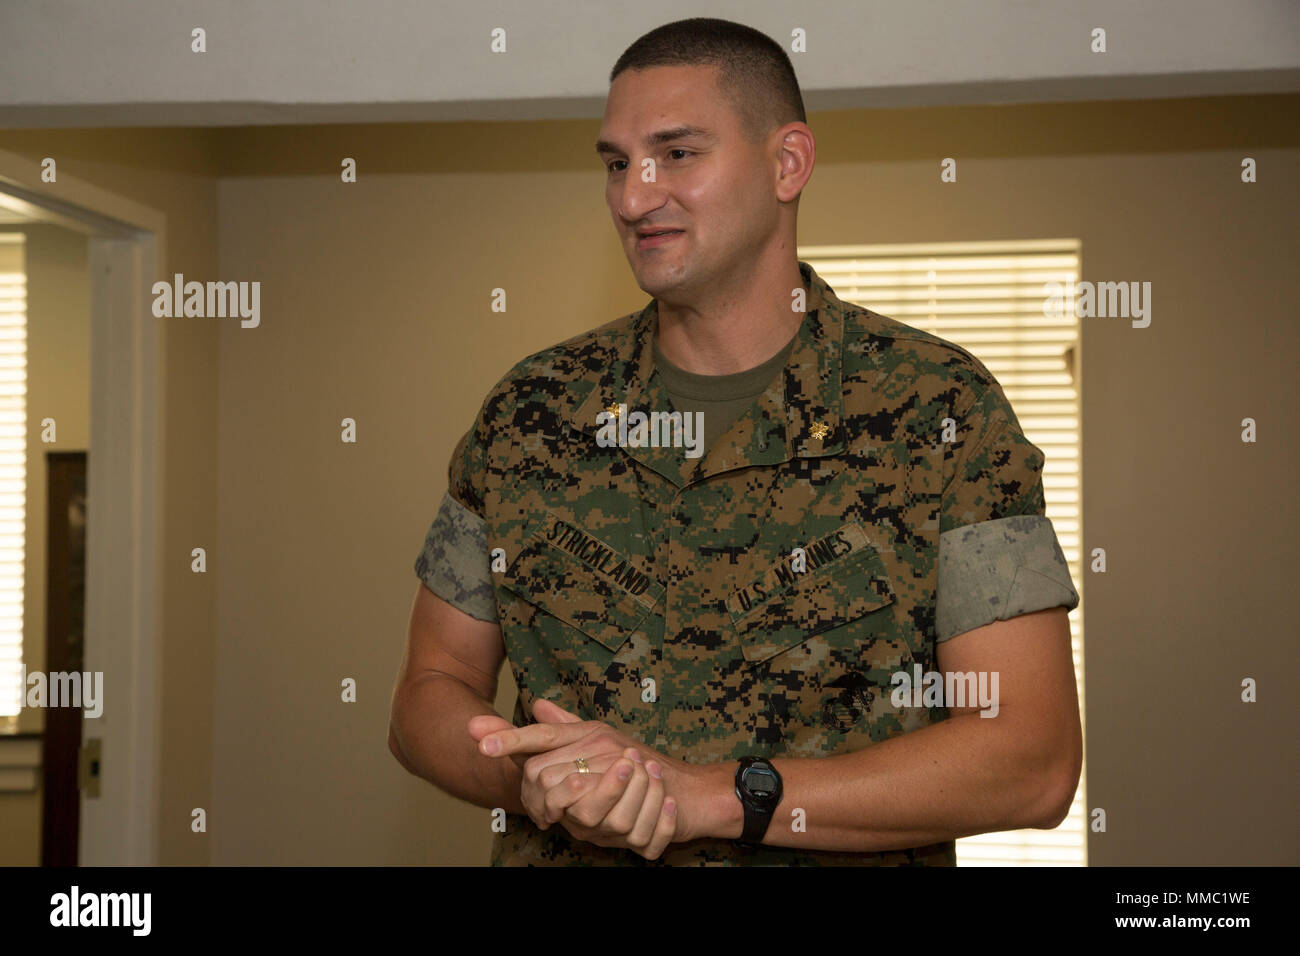 U.S. Marine Corps Maj. Binford R. Strickland gives his remarks following  his promotion ceremony on Camp Lejeune, N.C., Oct. 6, 2017. Strickland was  promoted from Captain to Major by Maj. Gen. John